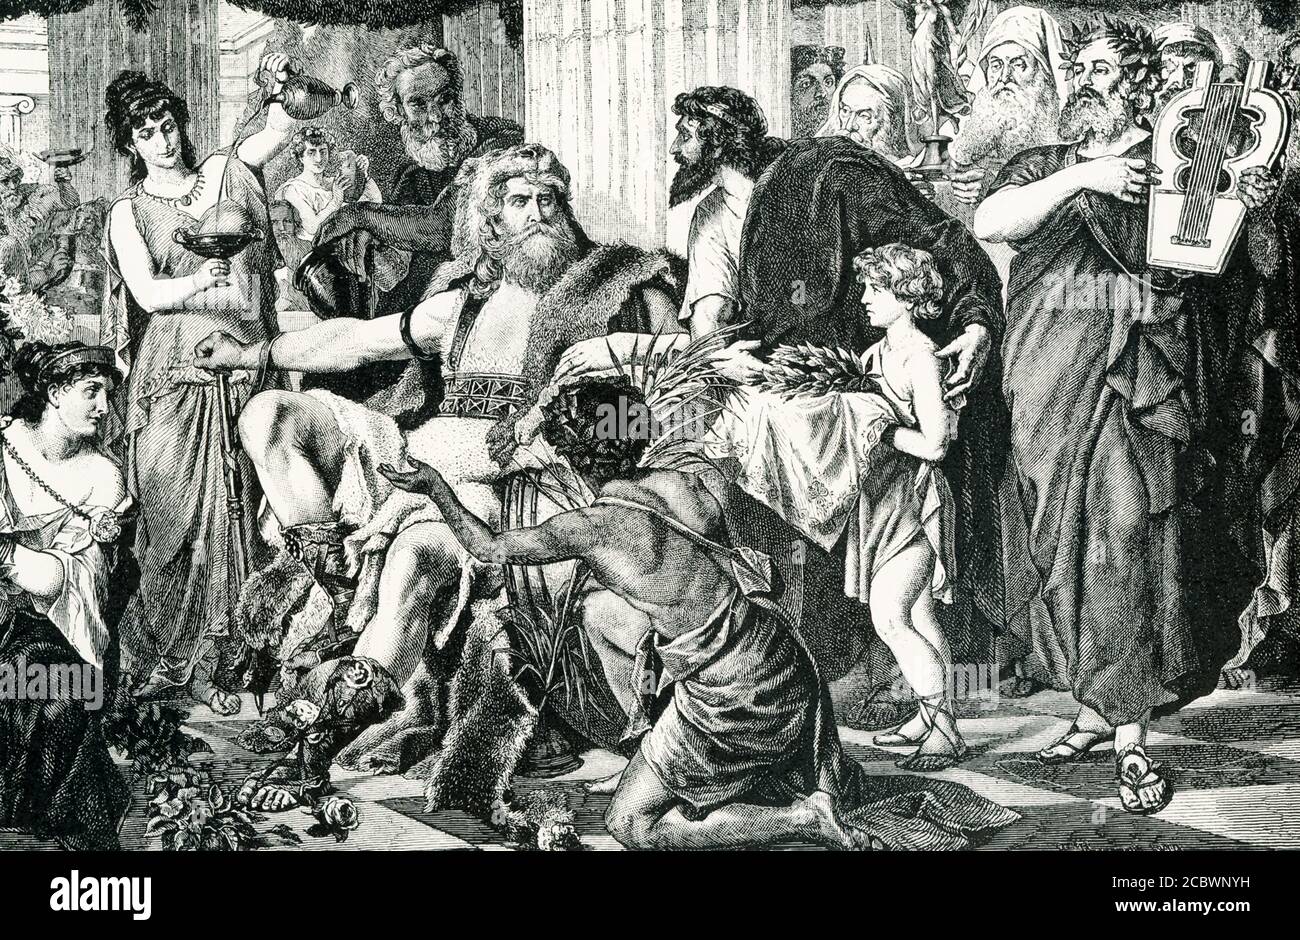 The caption on thisillustration datimng to around 1900 reads: Alaric Receiving the Presents of the Athenians. This picture shows Athens in her decadence. Her citizens had become very wealthy by trade, but they had lost their ancient spirit and courage. Alaric, with an army of Gothic barbarians, ravaged Greece, and was received by the degenerate Athenians as a conqueror. Both men and women brought him presents, knelt at his feet, and did all that slavish cowardice could suggest to please him. Stock Photo